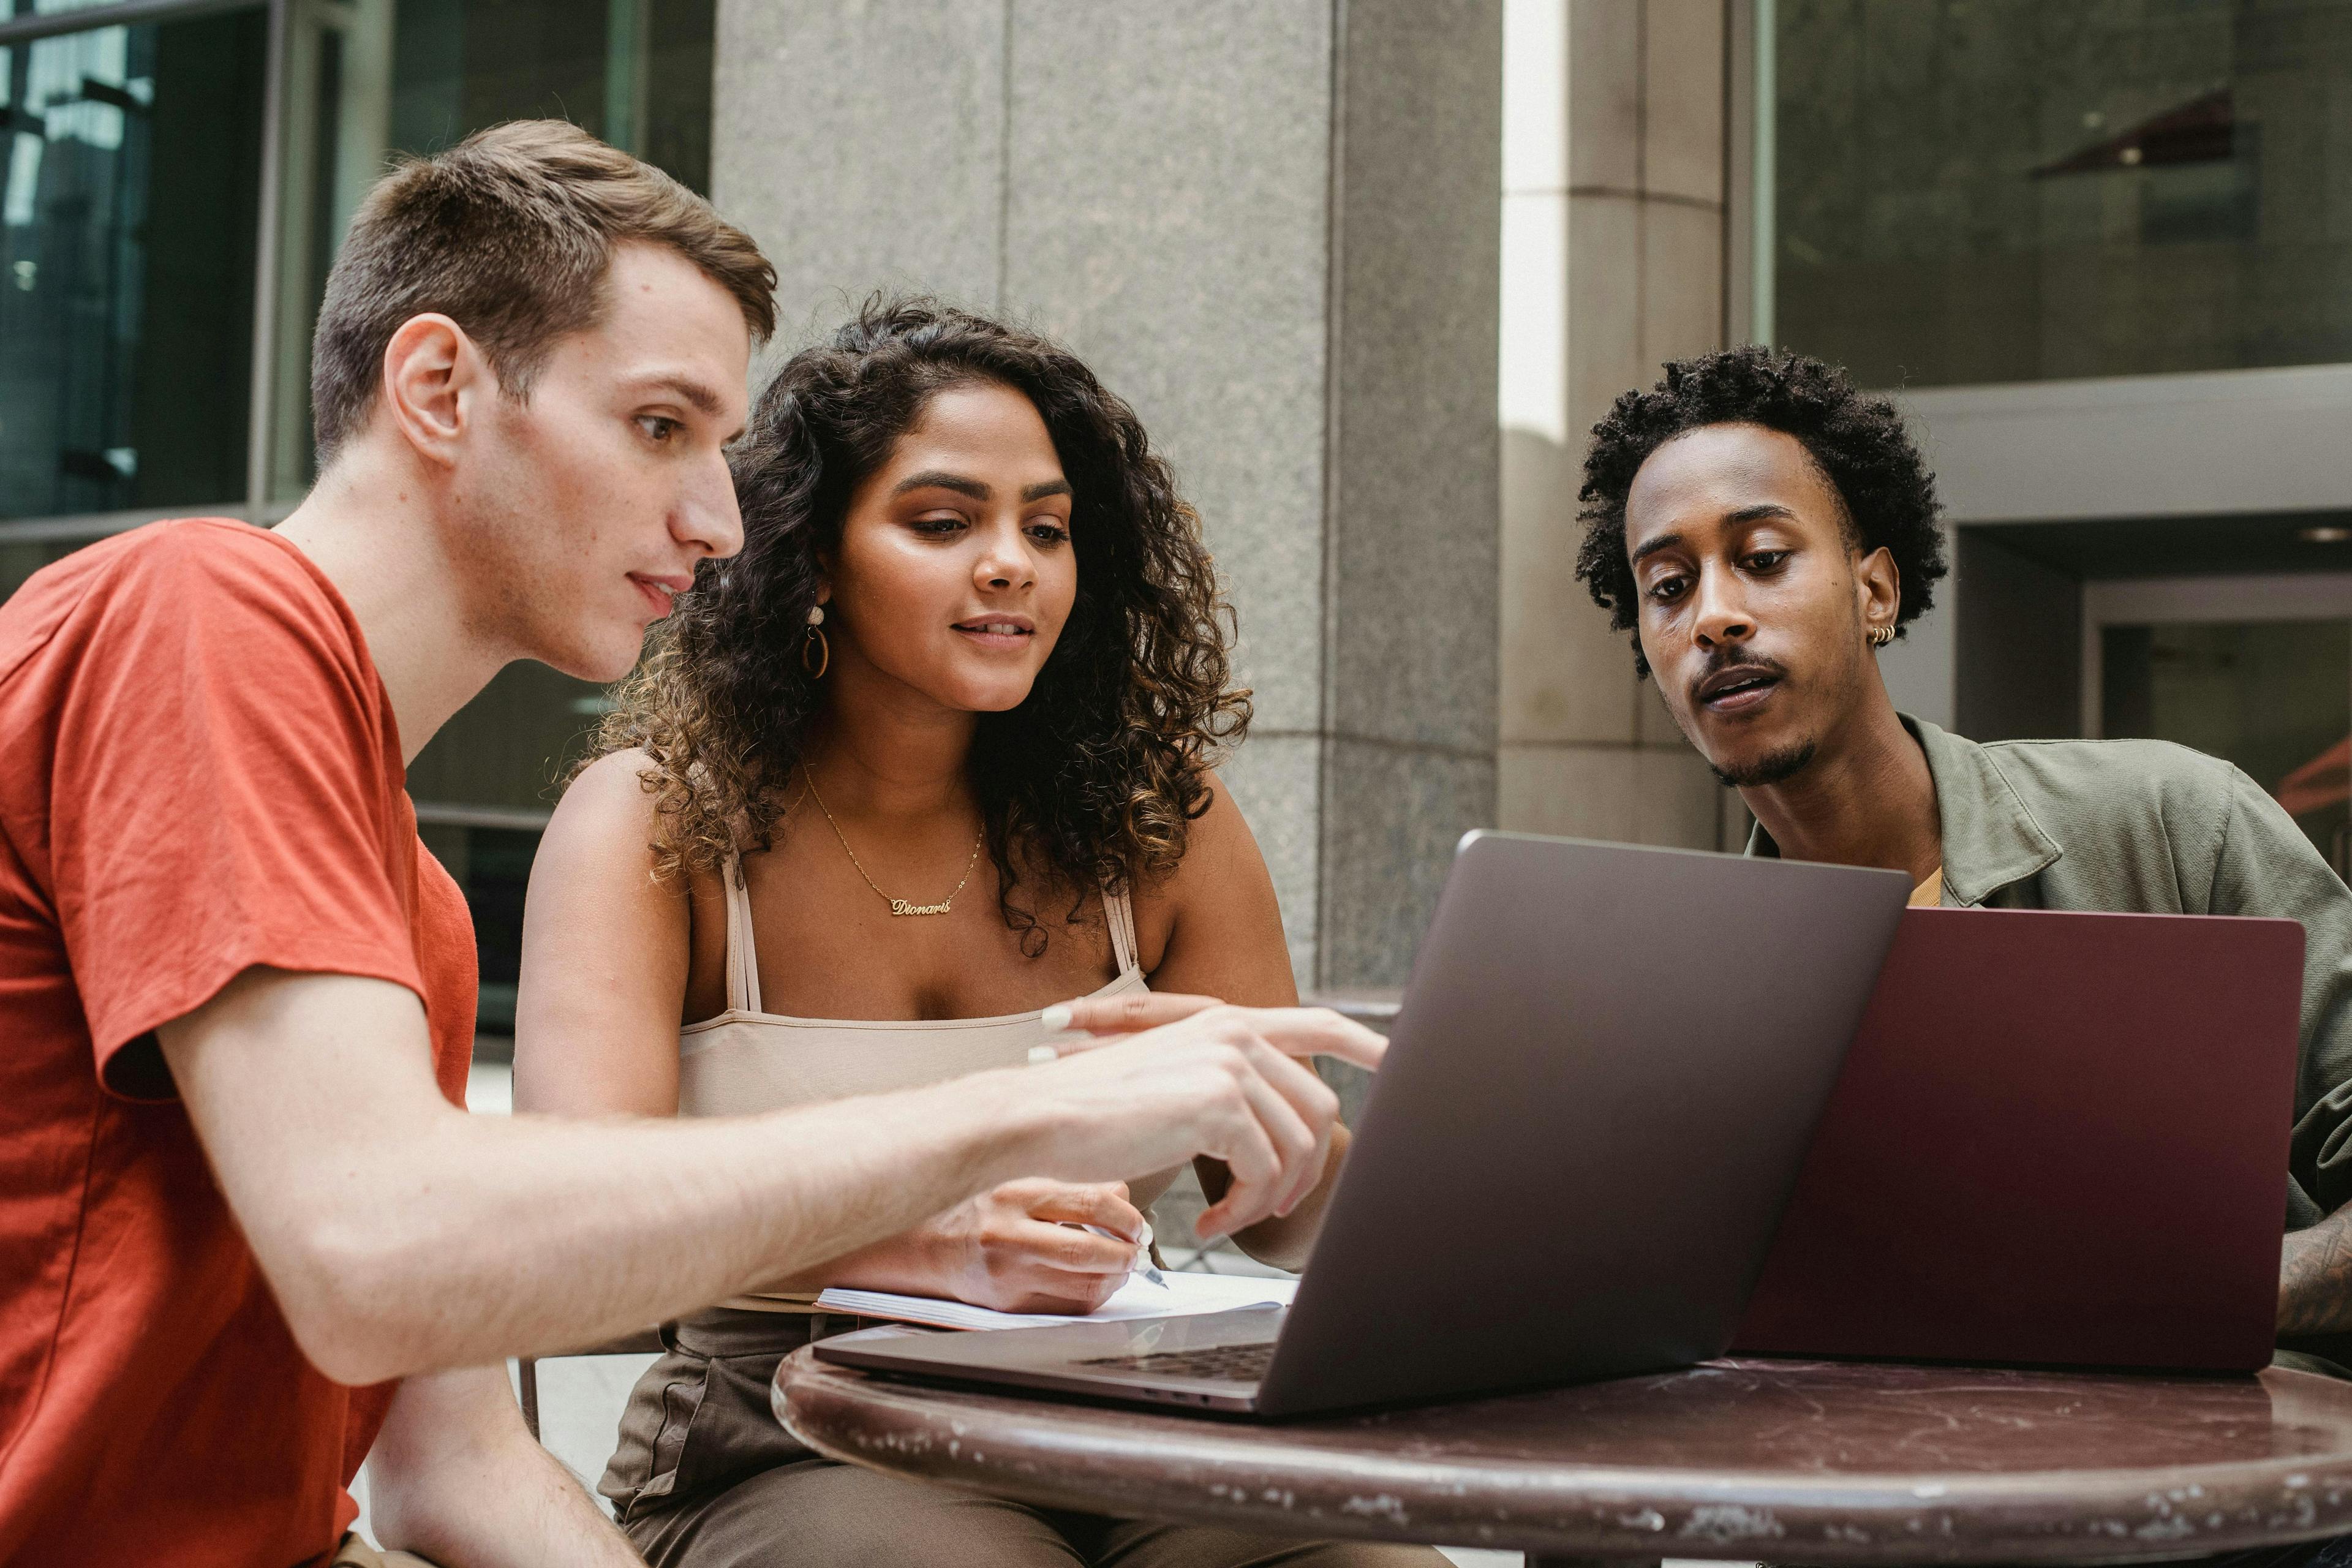 Three people are collaborating at an outdoor table, using laptops and discussing ideas, symbolizing teamwork and modern business strategies. They appear focused and engaged, making it an ideal representation for landing page frameworks.